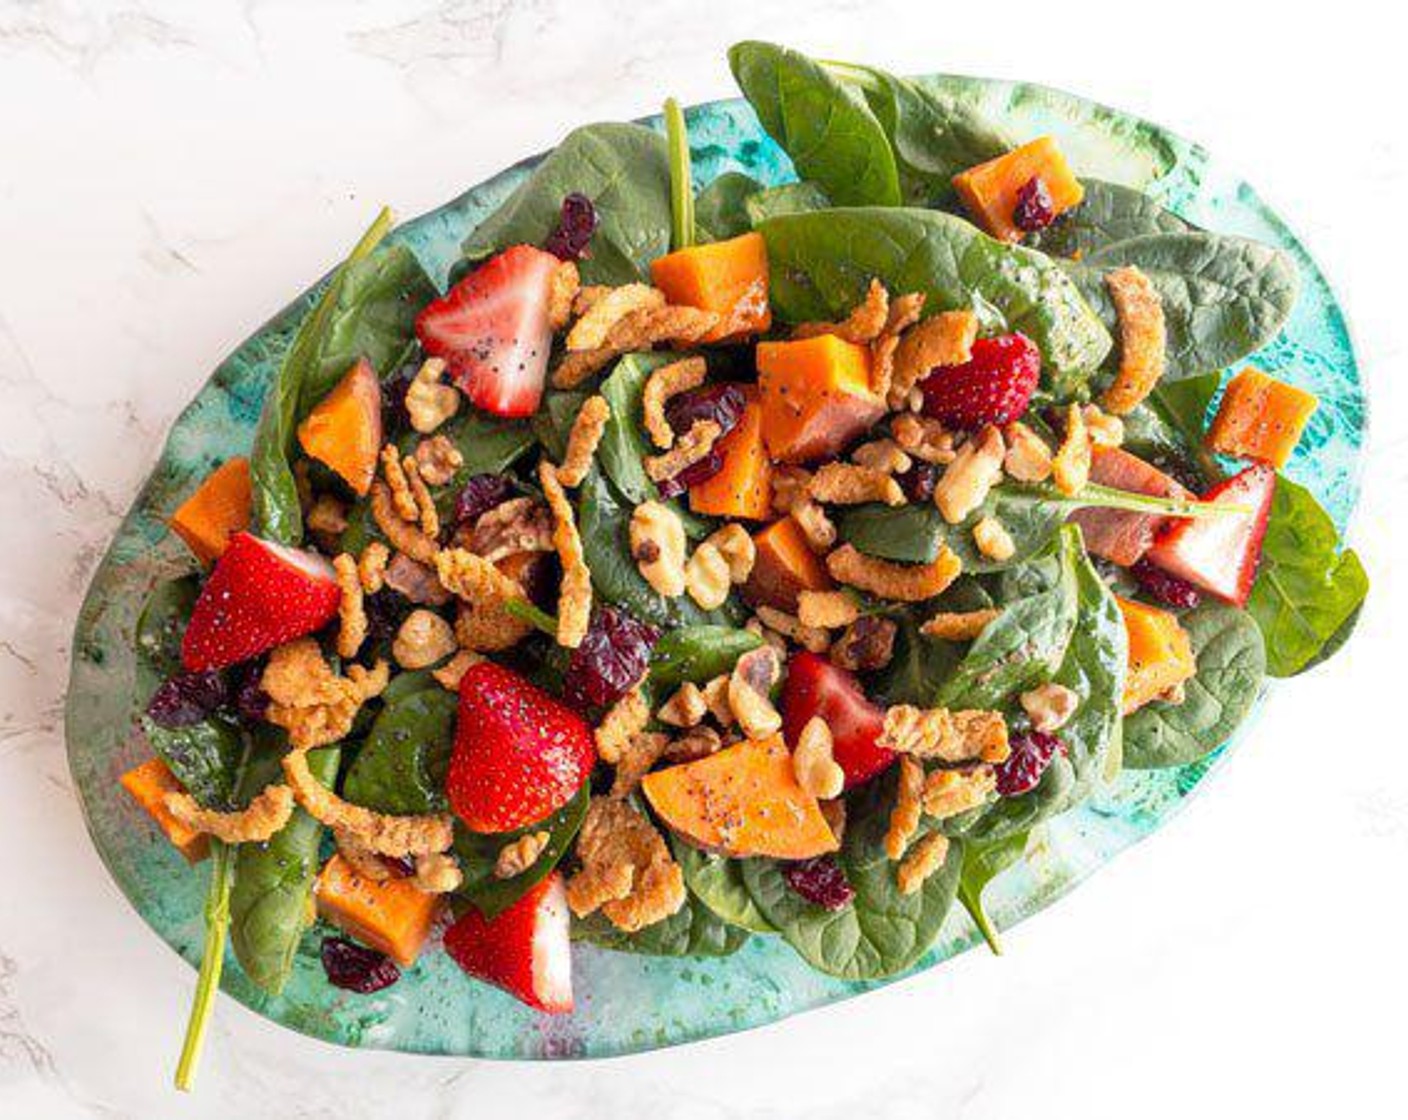 step 3 Add Fresh Spinach (1 pckg) to a large bowl or platter. Add Fresh Strawberries (2 cups), Fried Onions (1 cup), Dried Cranberries (1/4 cup), and Walnut (1/4 cup). Stir dressing and add just before serving. Enjoy!